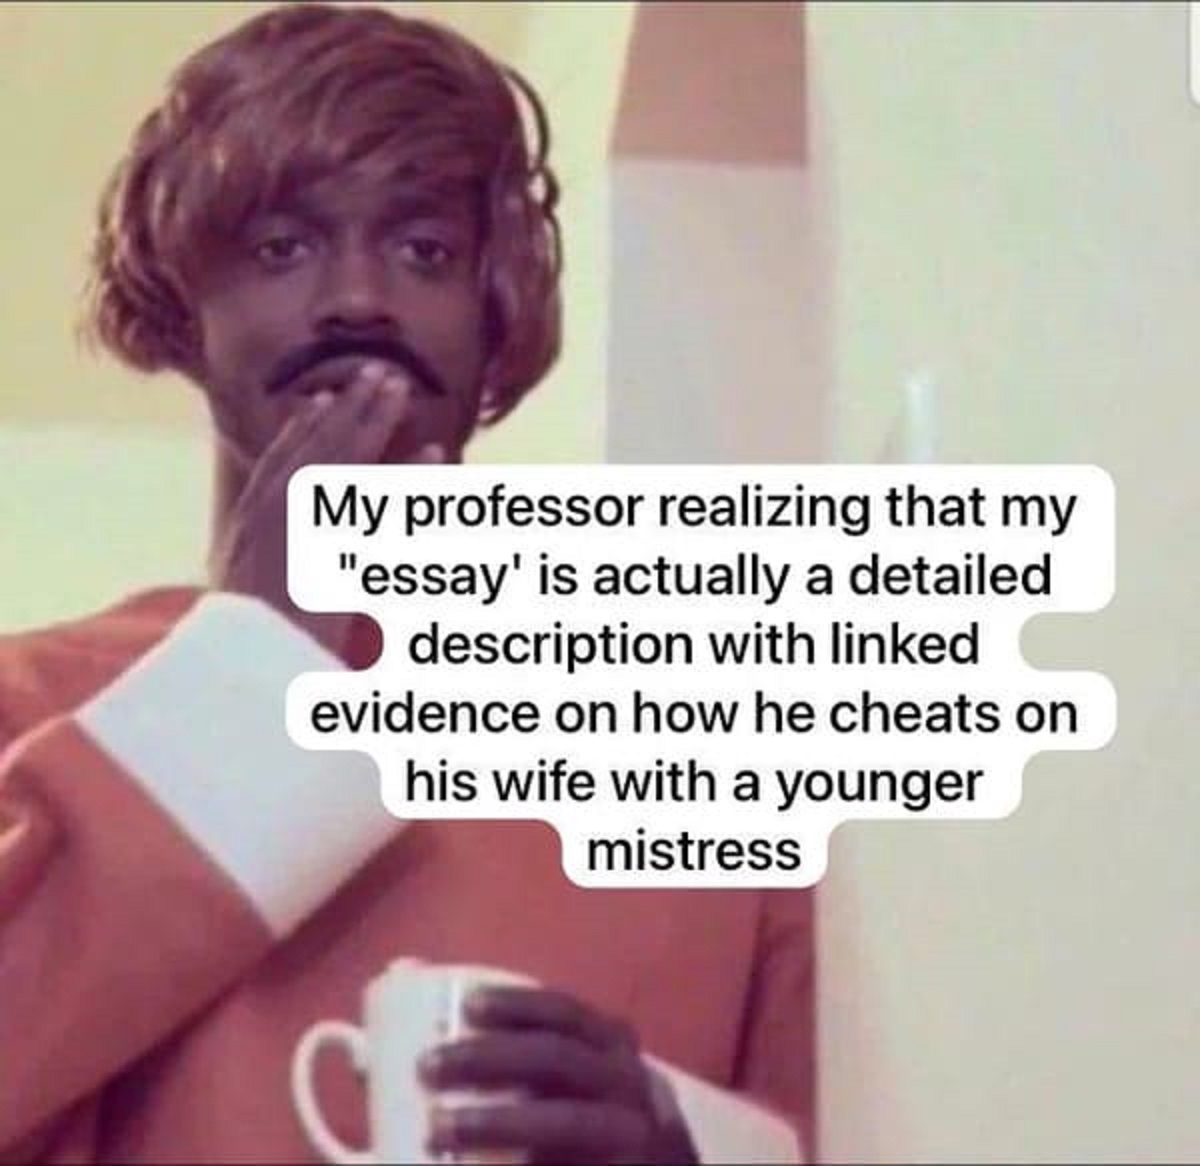 photo caption - My professor realizing that my "essay" is actually a detailed description with linked evidence on how he cheats on his wife with a younger mistress